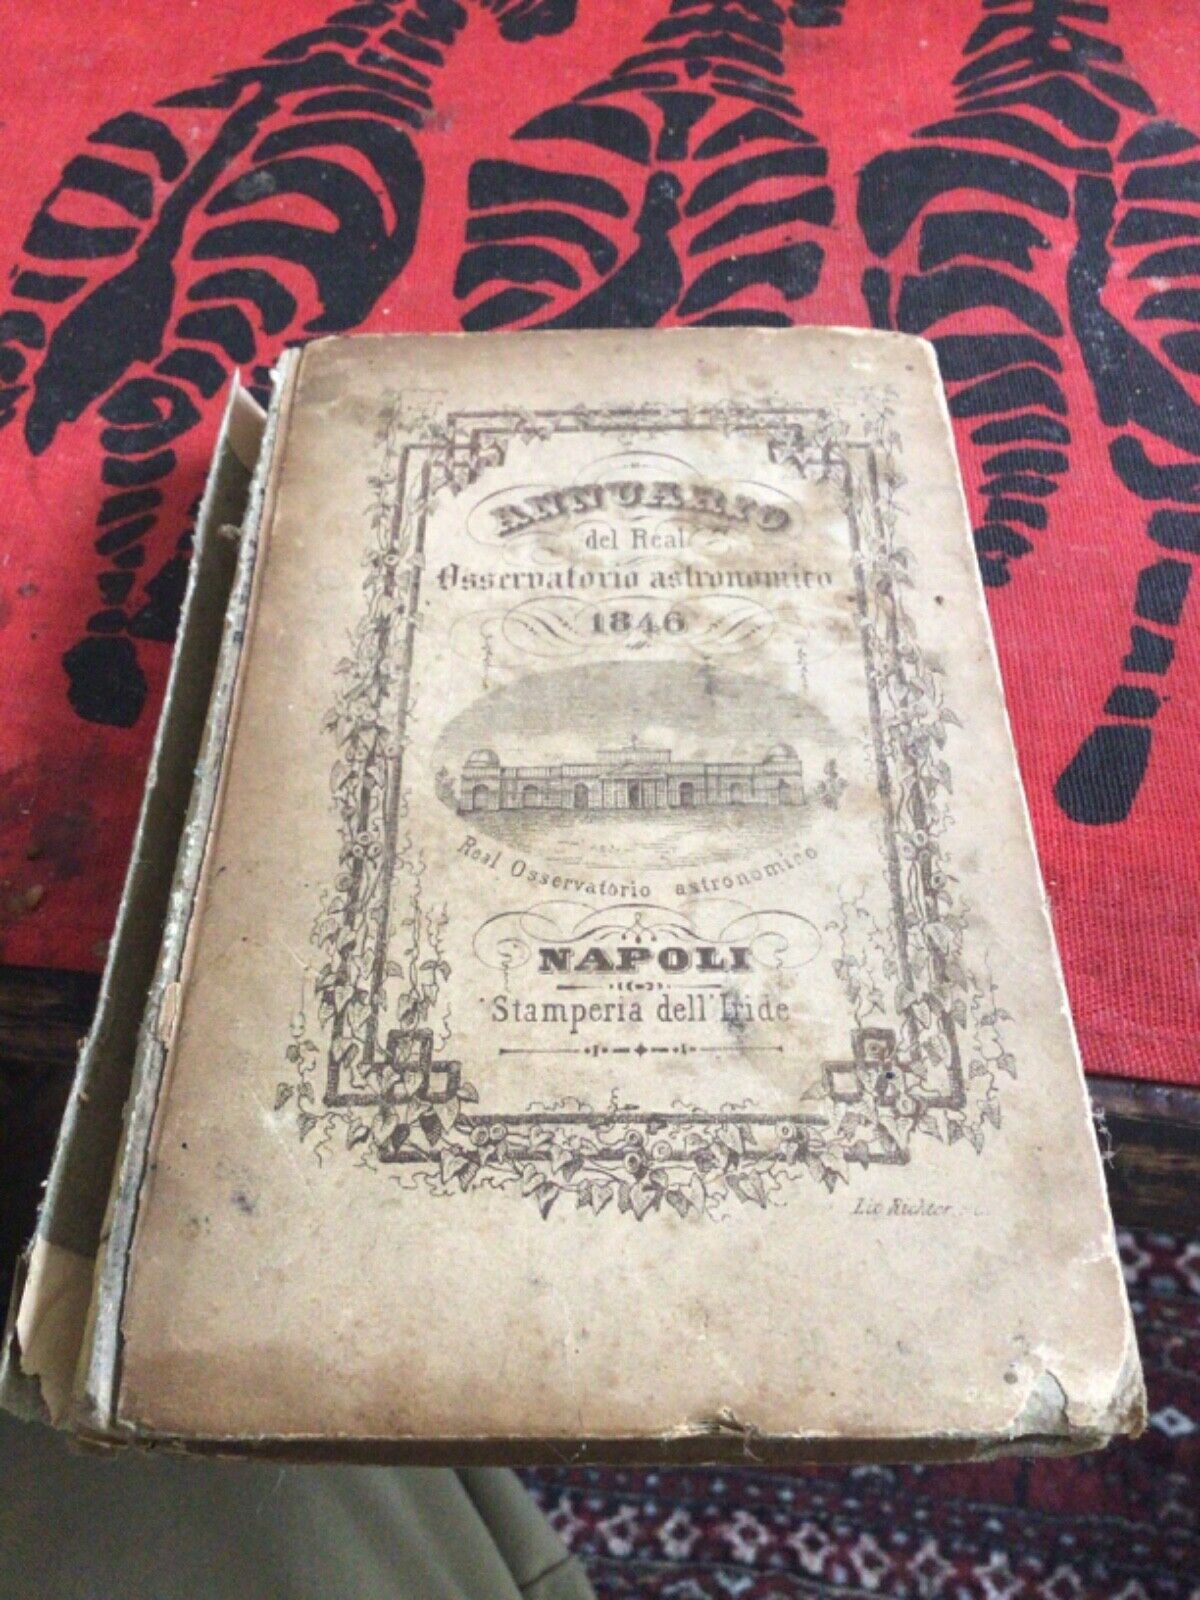 1846 Annual of the Royal Astronomical Observatory Naples